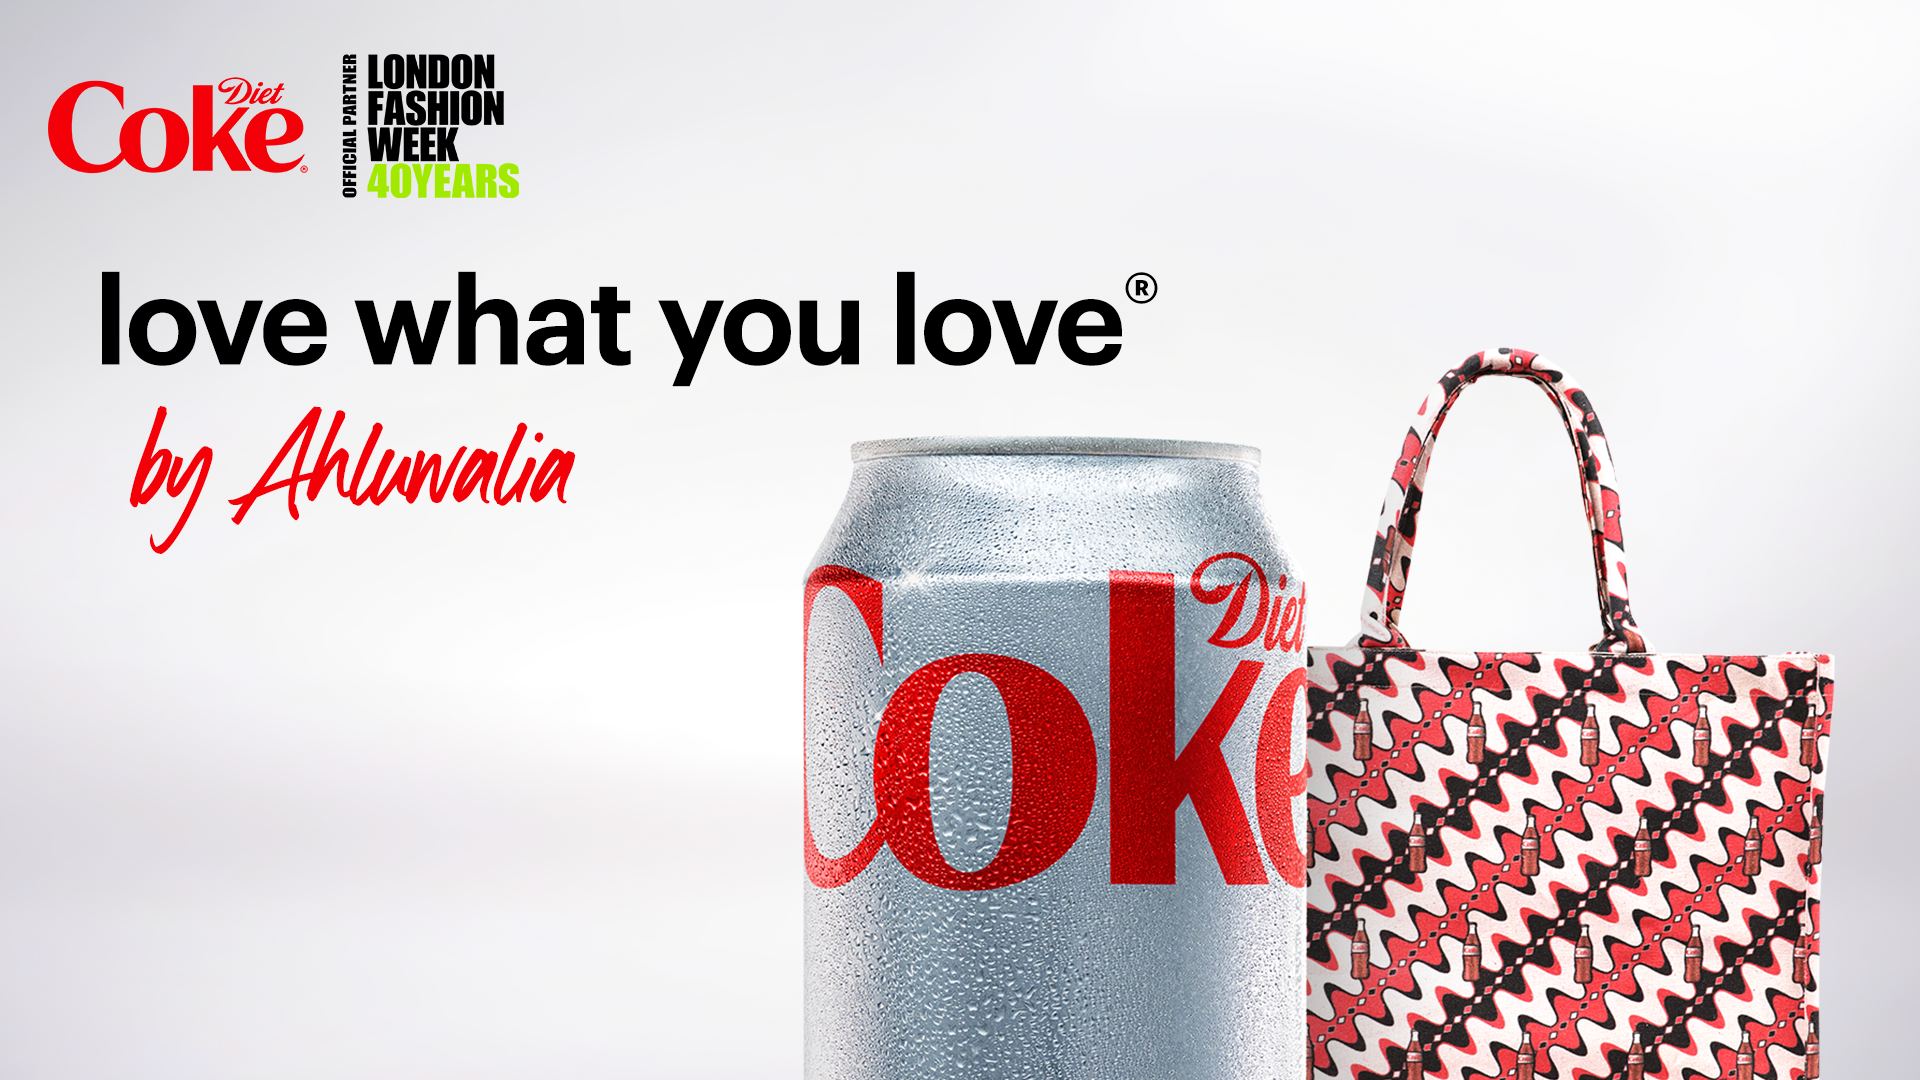 can of diet coke and fashion tote bags